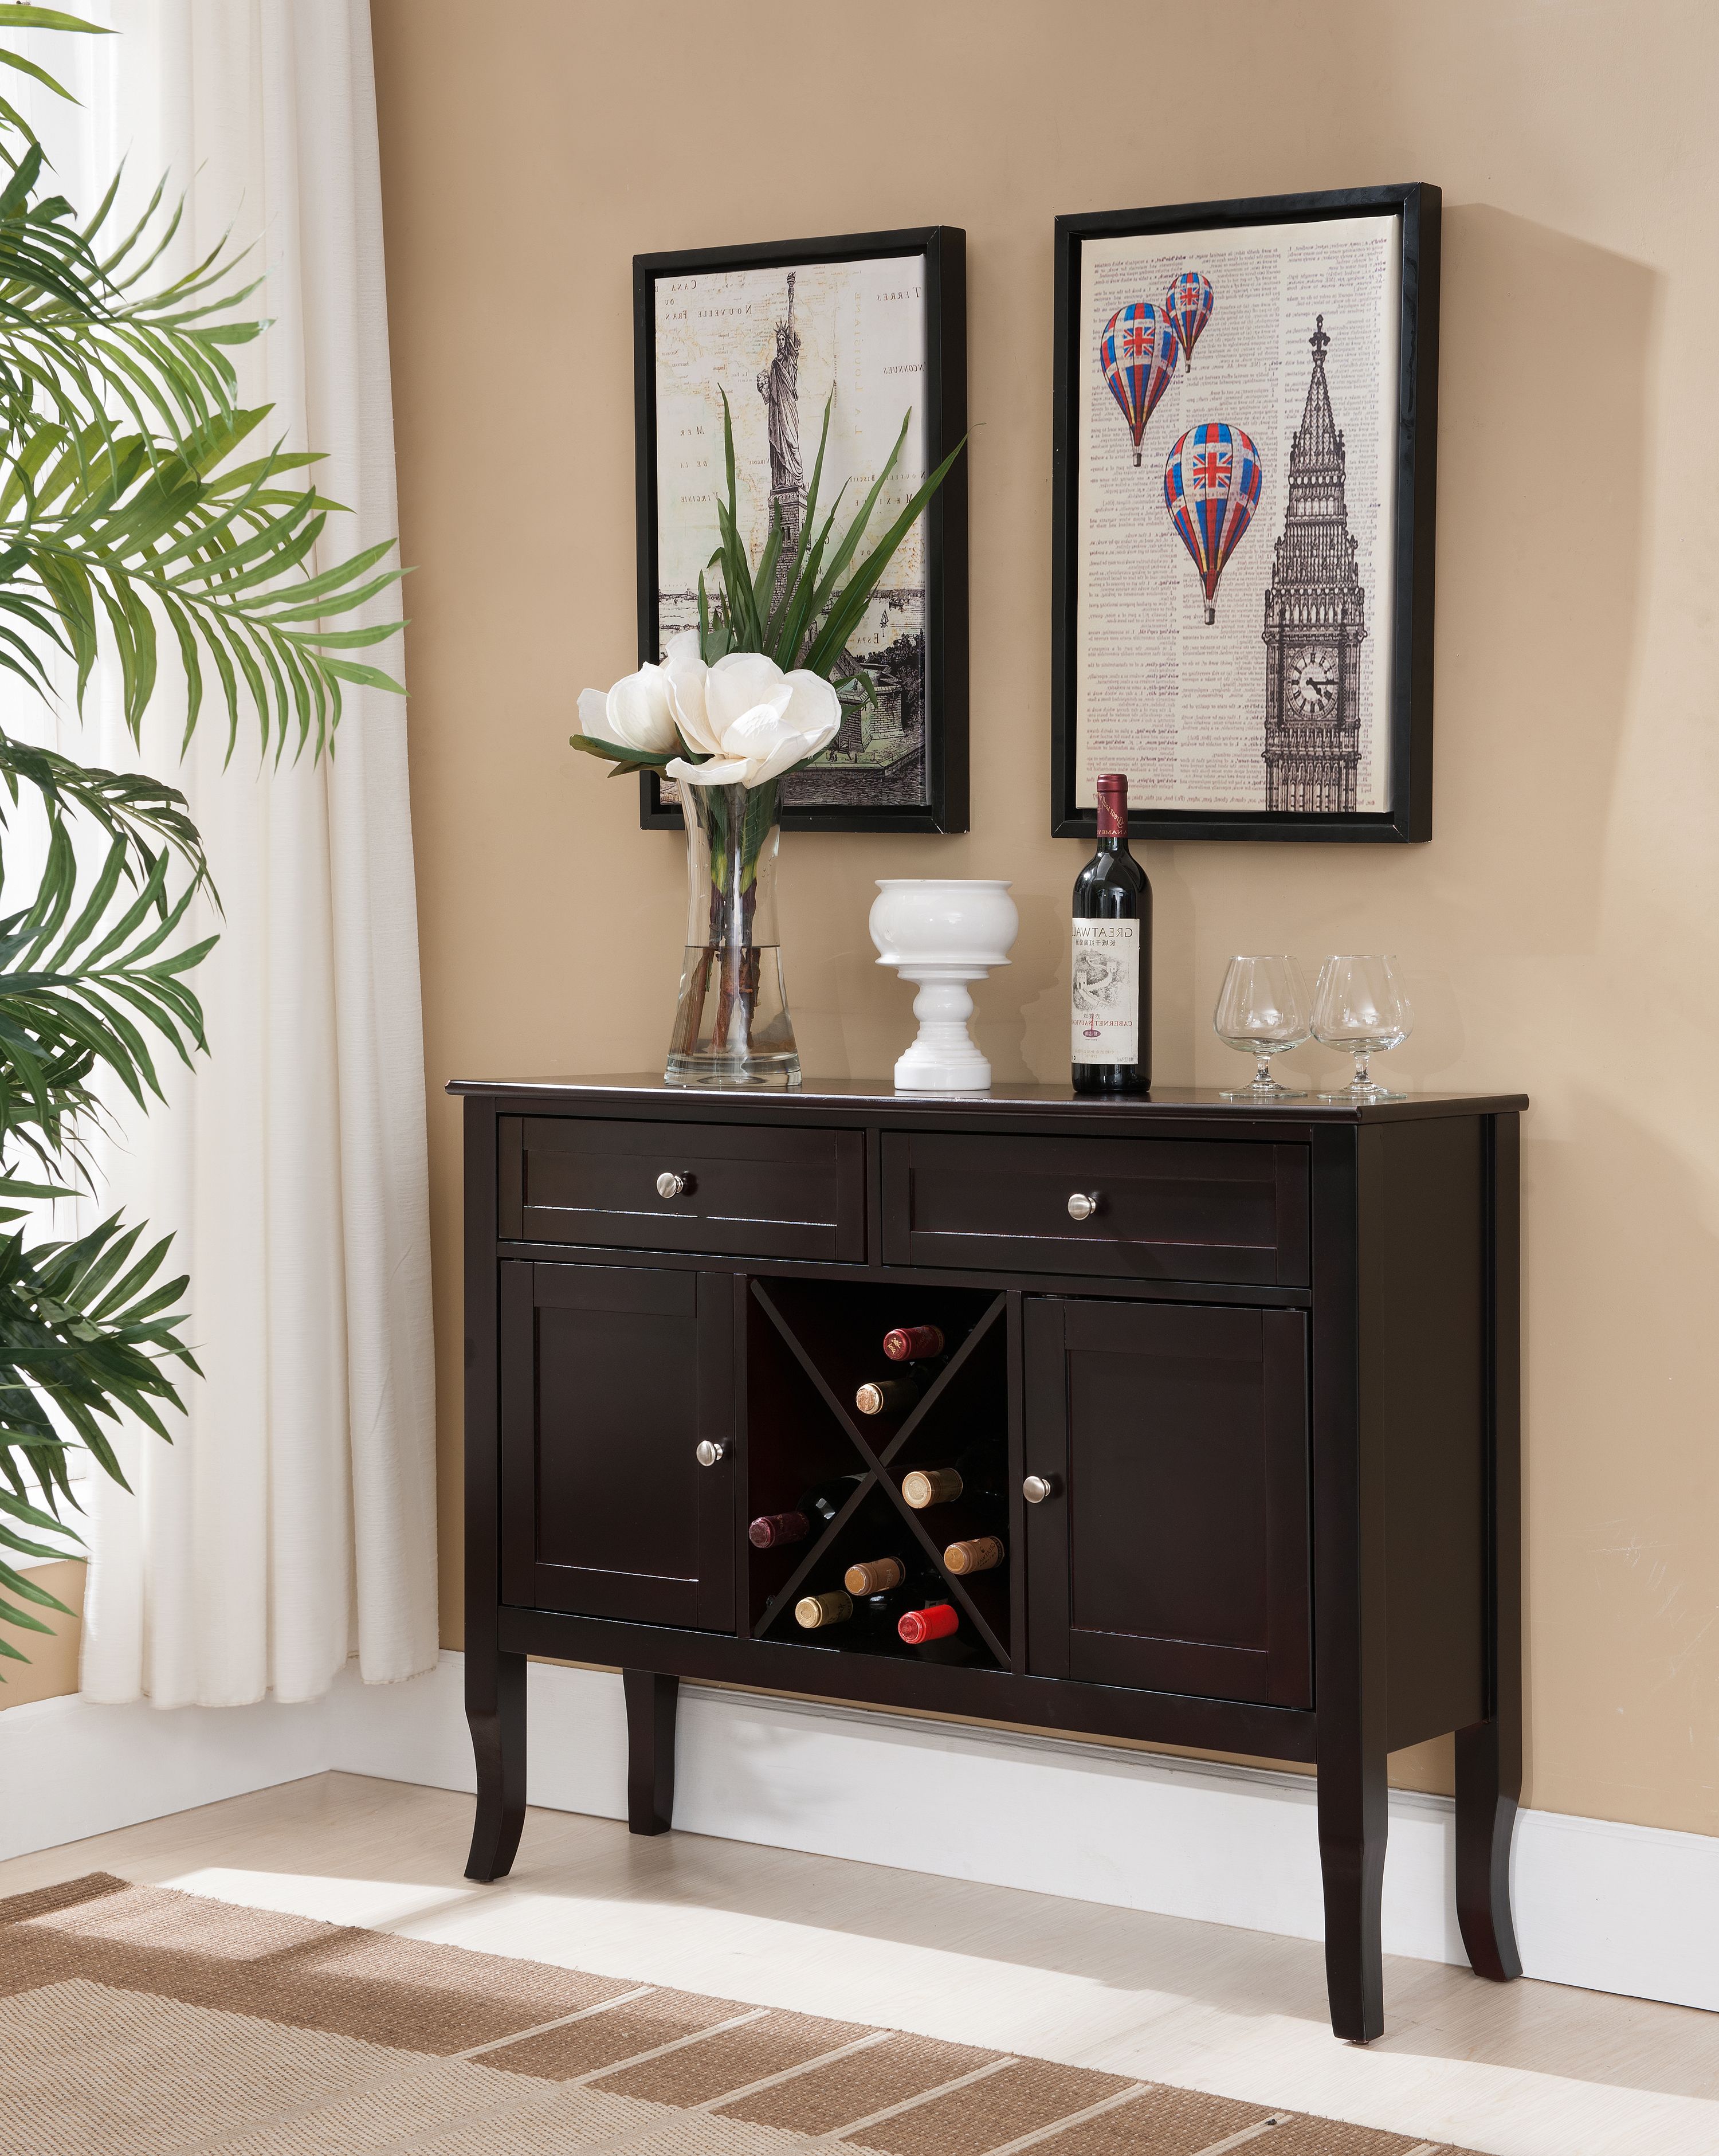 Eric Dark Cherry Wood Contemporary Wine Rack Buffet Display Console Table  With Storage Drawers & Cabinet Doors – Walmart For Buffets With Cherry Finish (View 17 of 30)